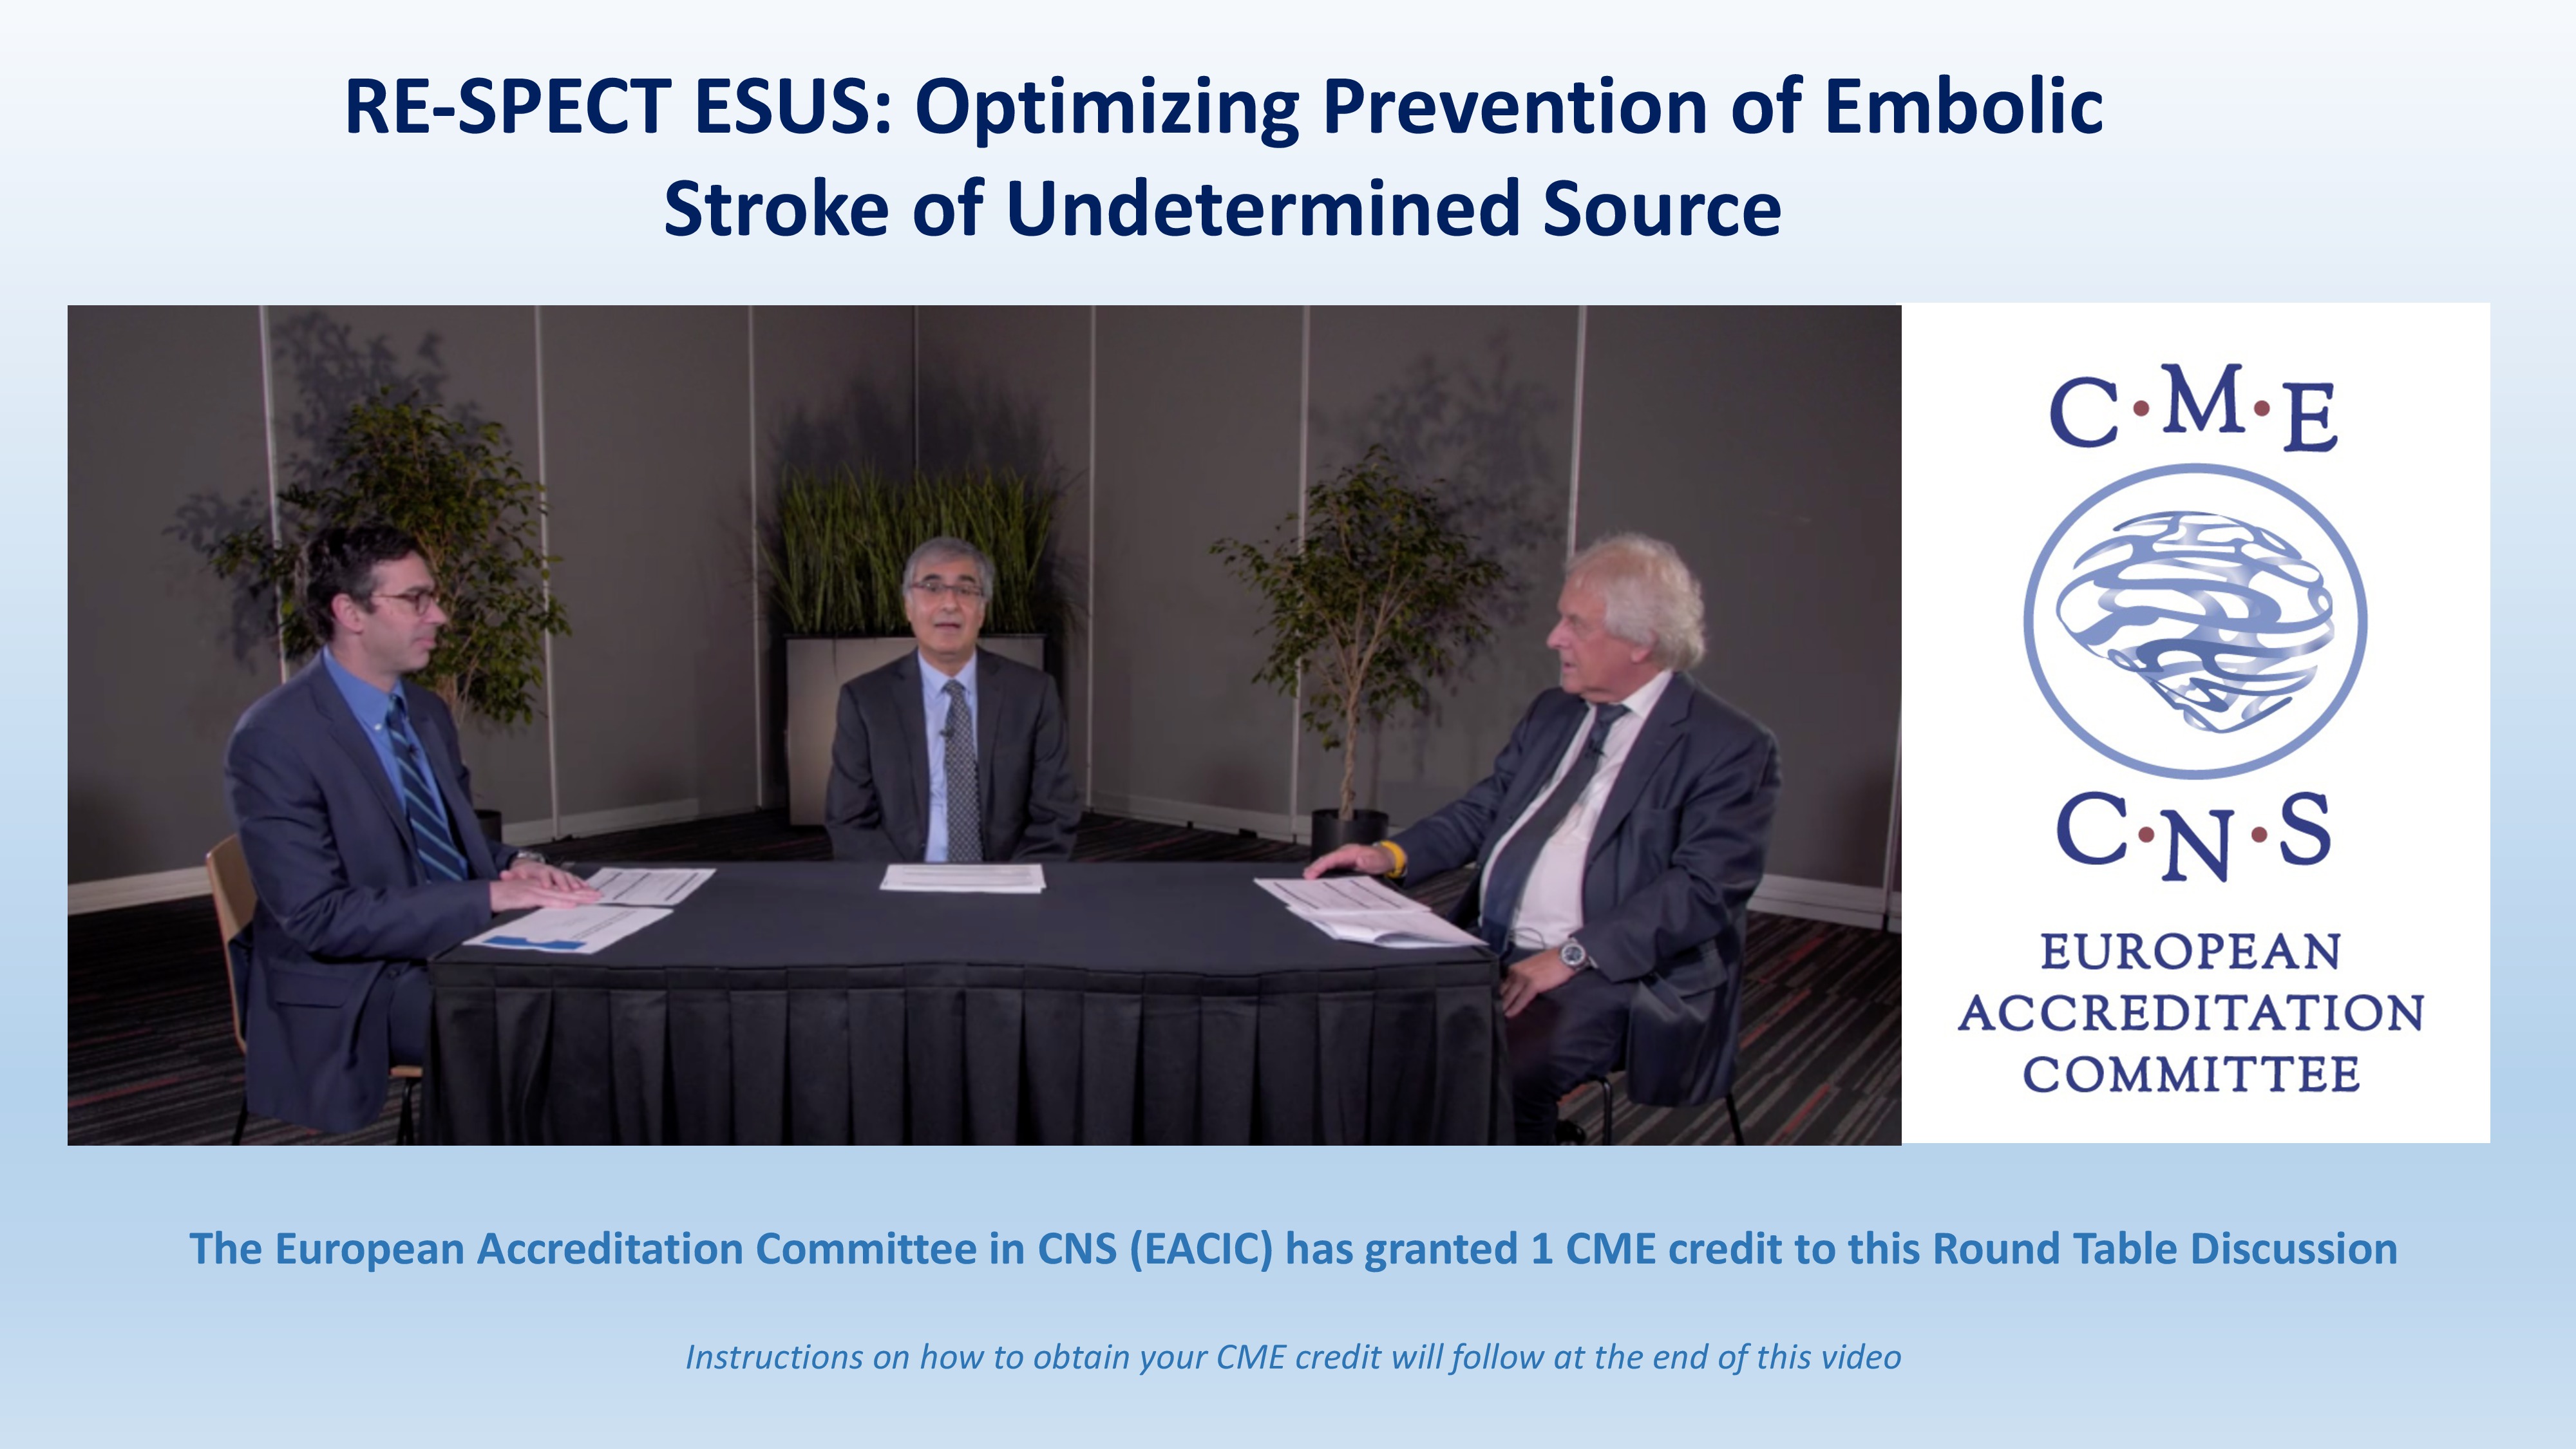 RE-SPECT ESUS: Optimizing Prevention of Embolic Stroke of Undetermined Source – Mike Sharma, Richard A. Bernstein & Hans-Christoph Diener